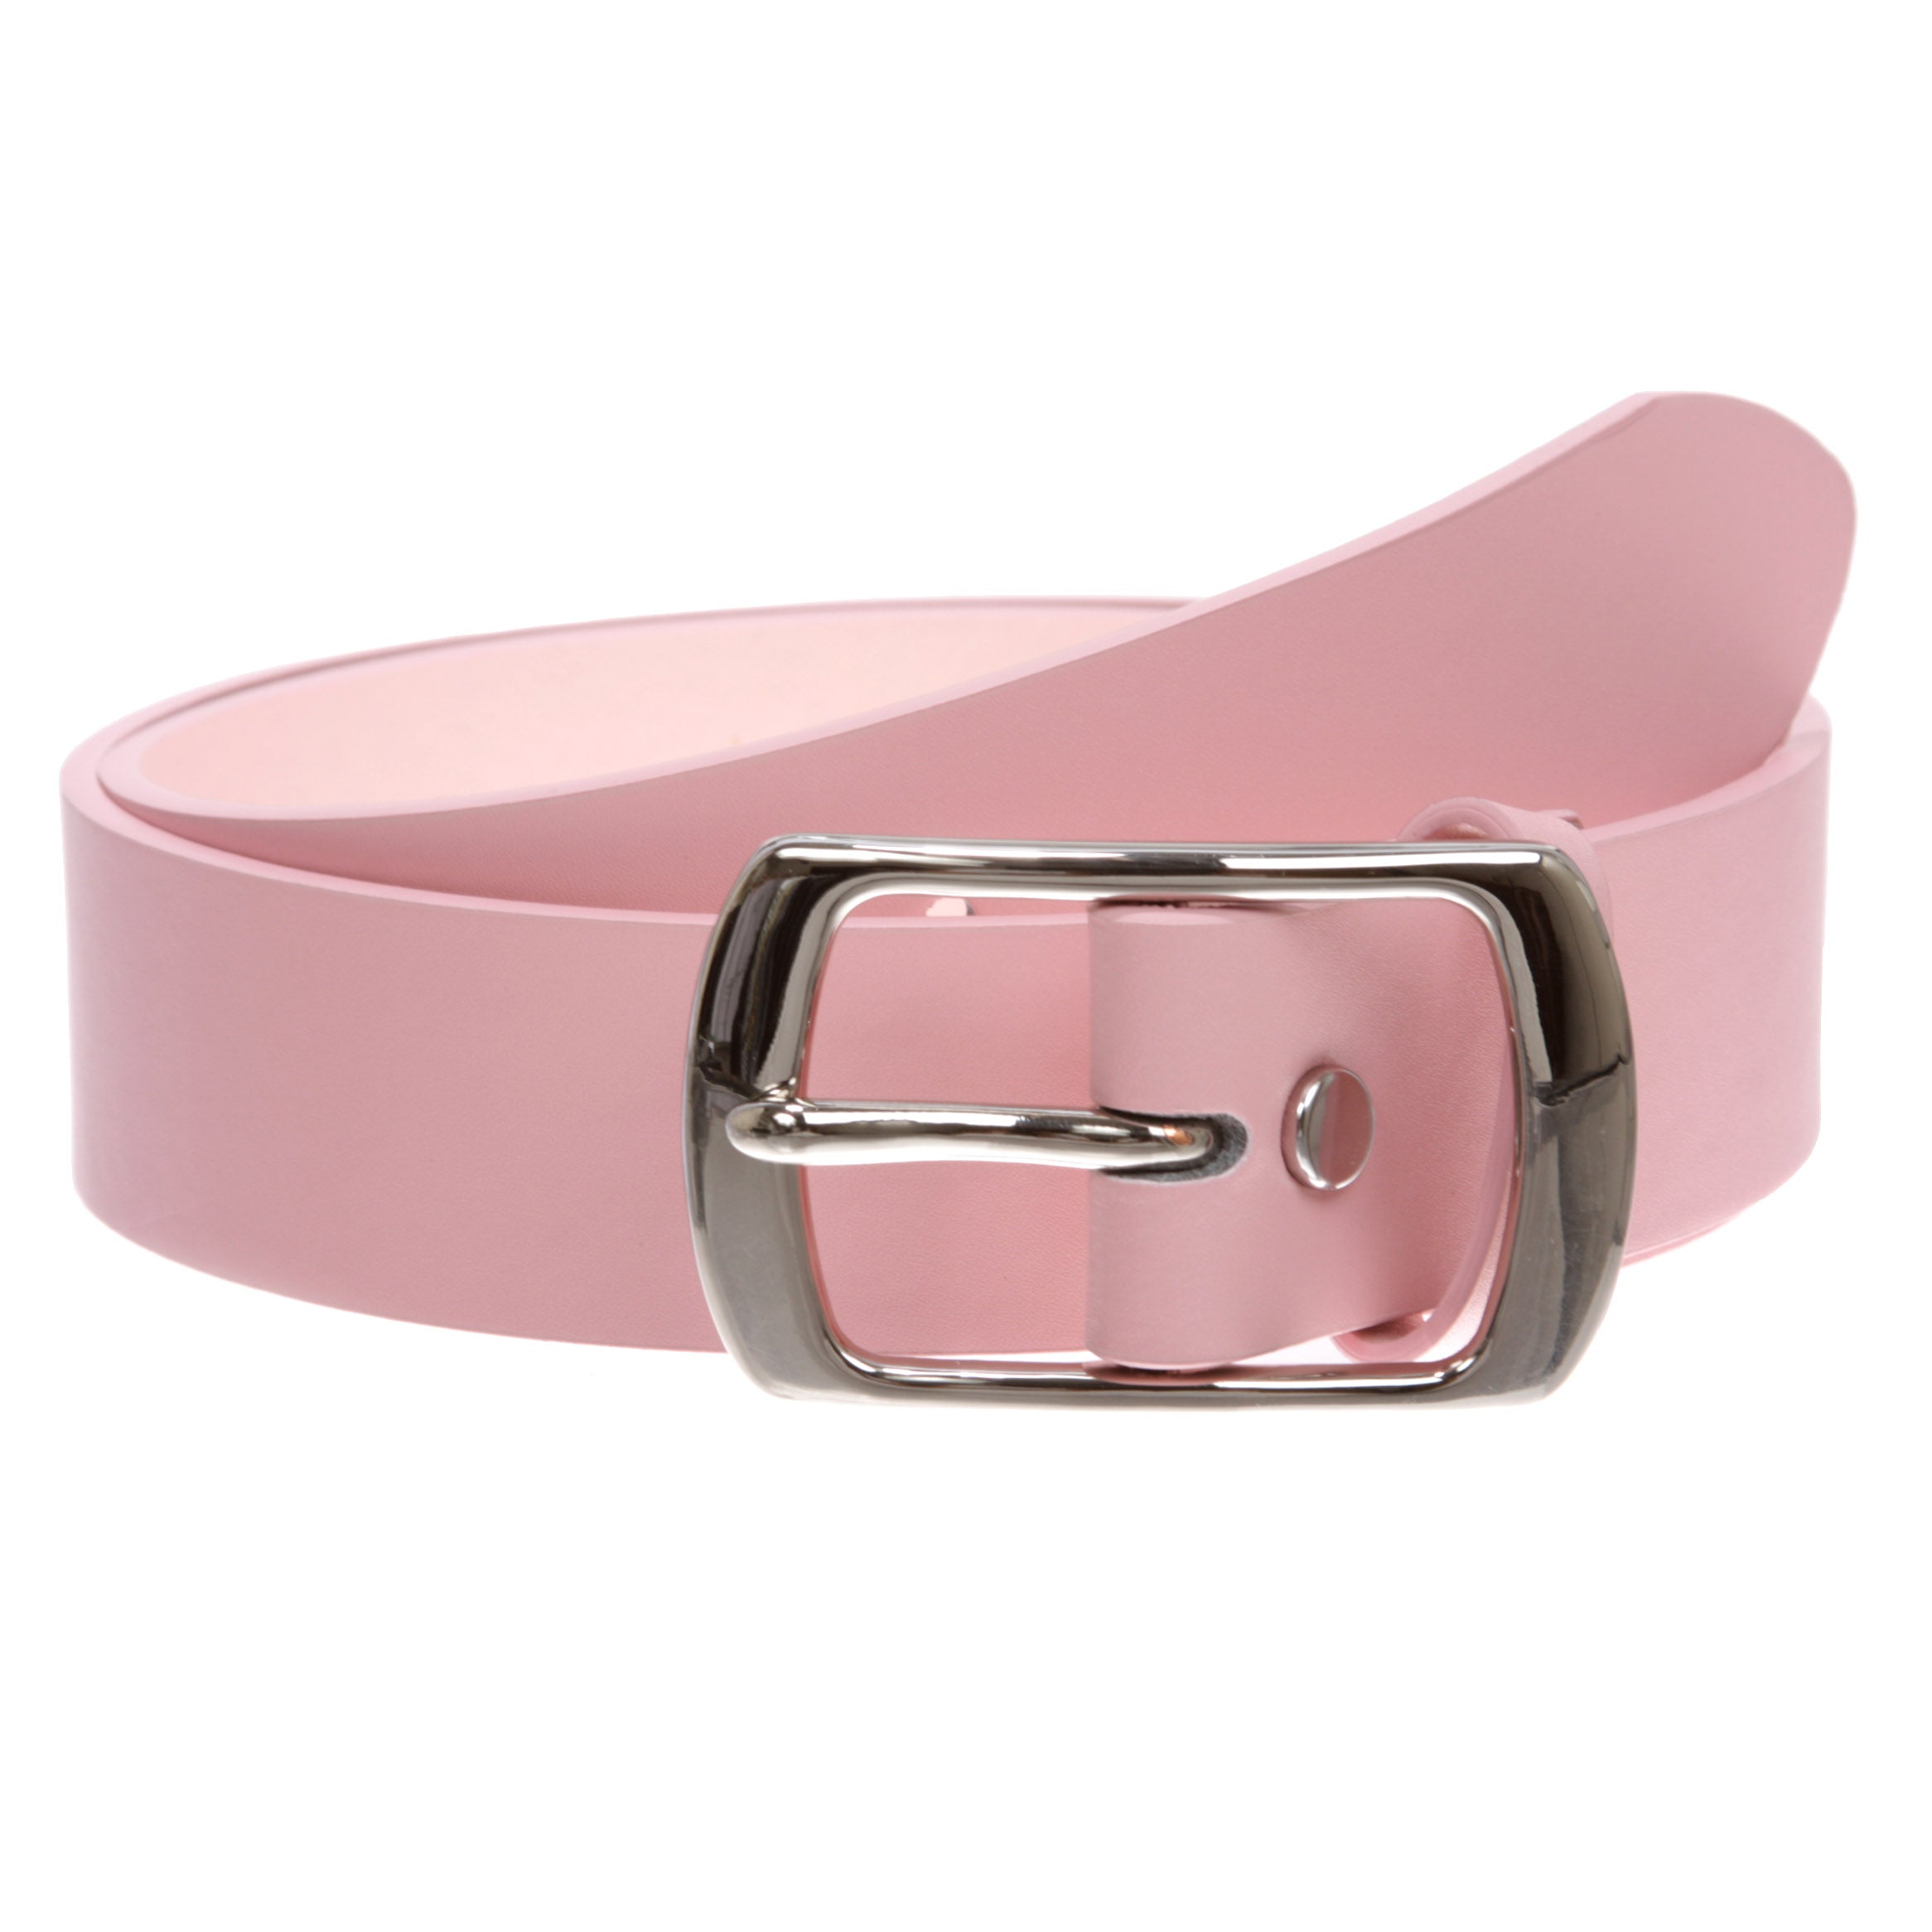 Women Casual PU Leather Dress Belt With Square Single Prong Buckle